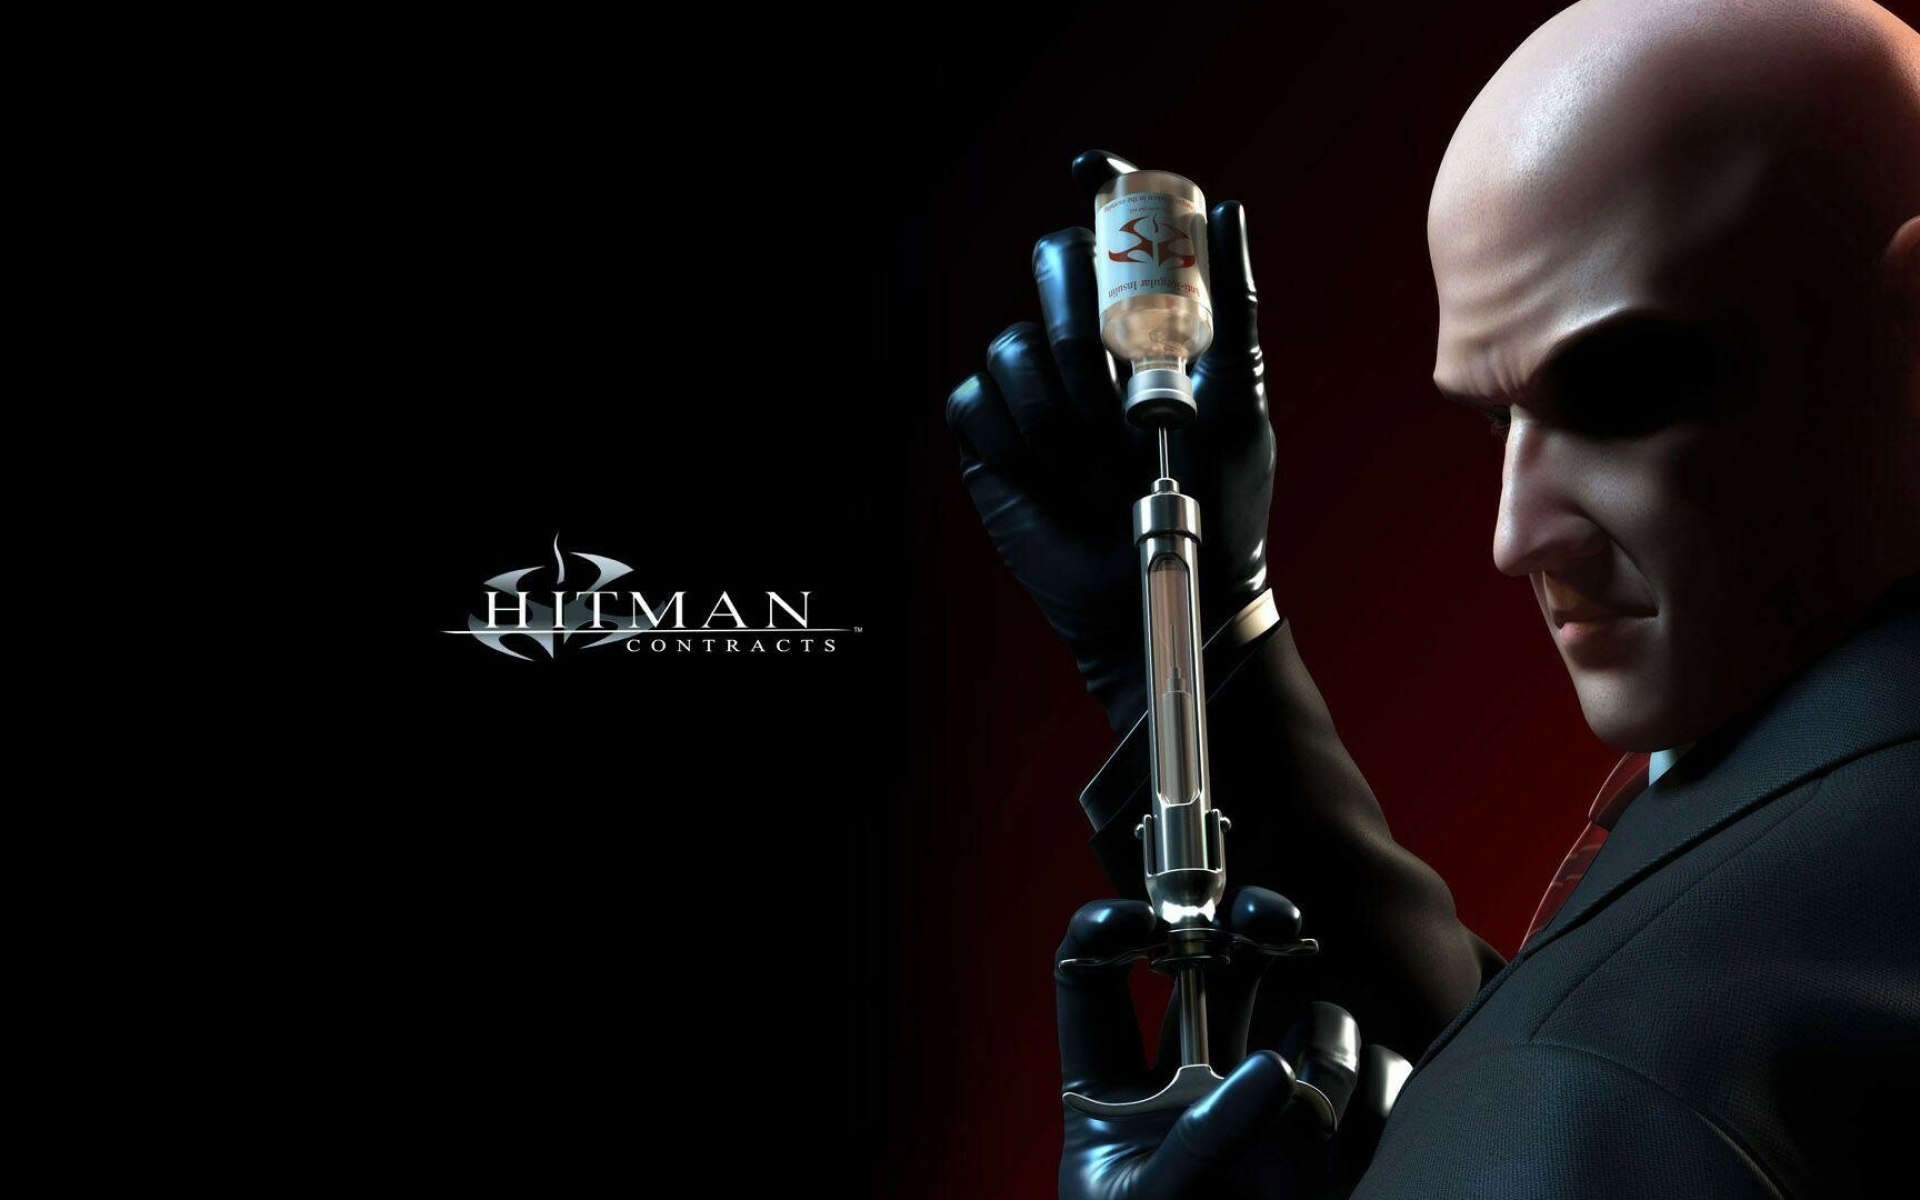 Hitman (Game): Contracts, The third installment, The cloned assassin Agent 47. 1920x1200 HD Wallpaper.